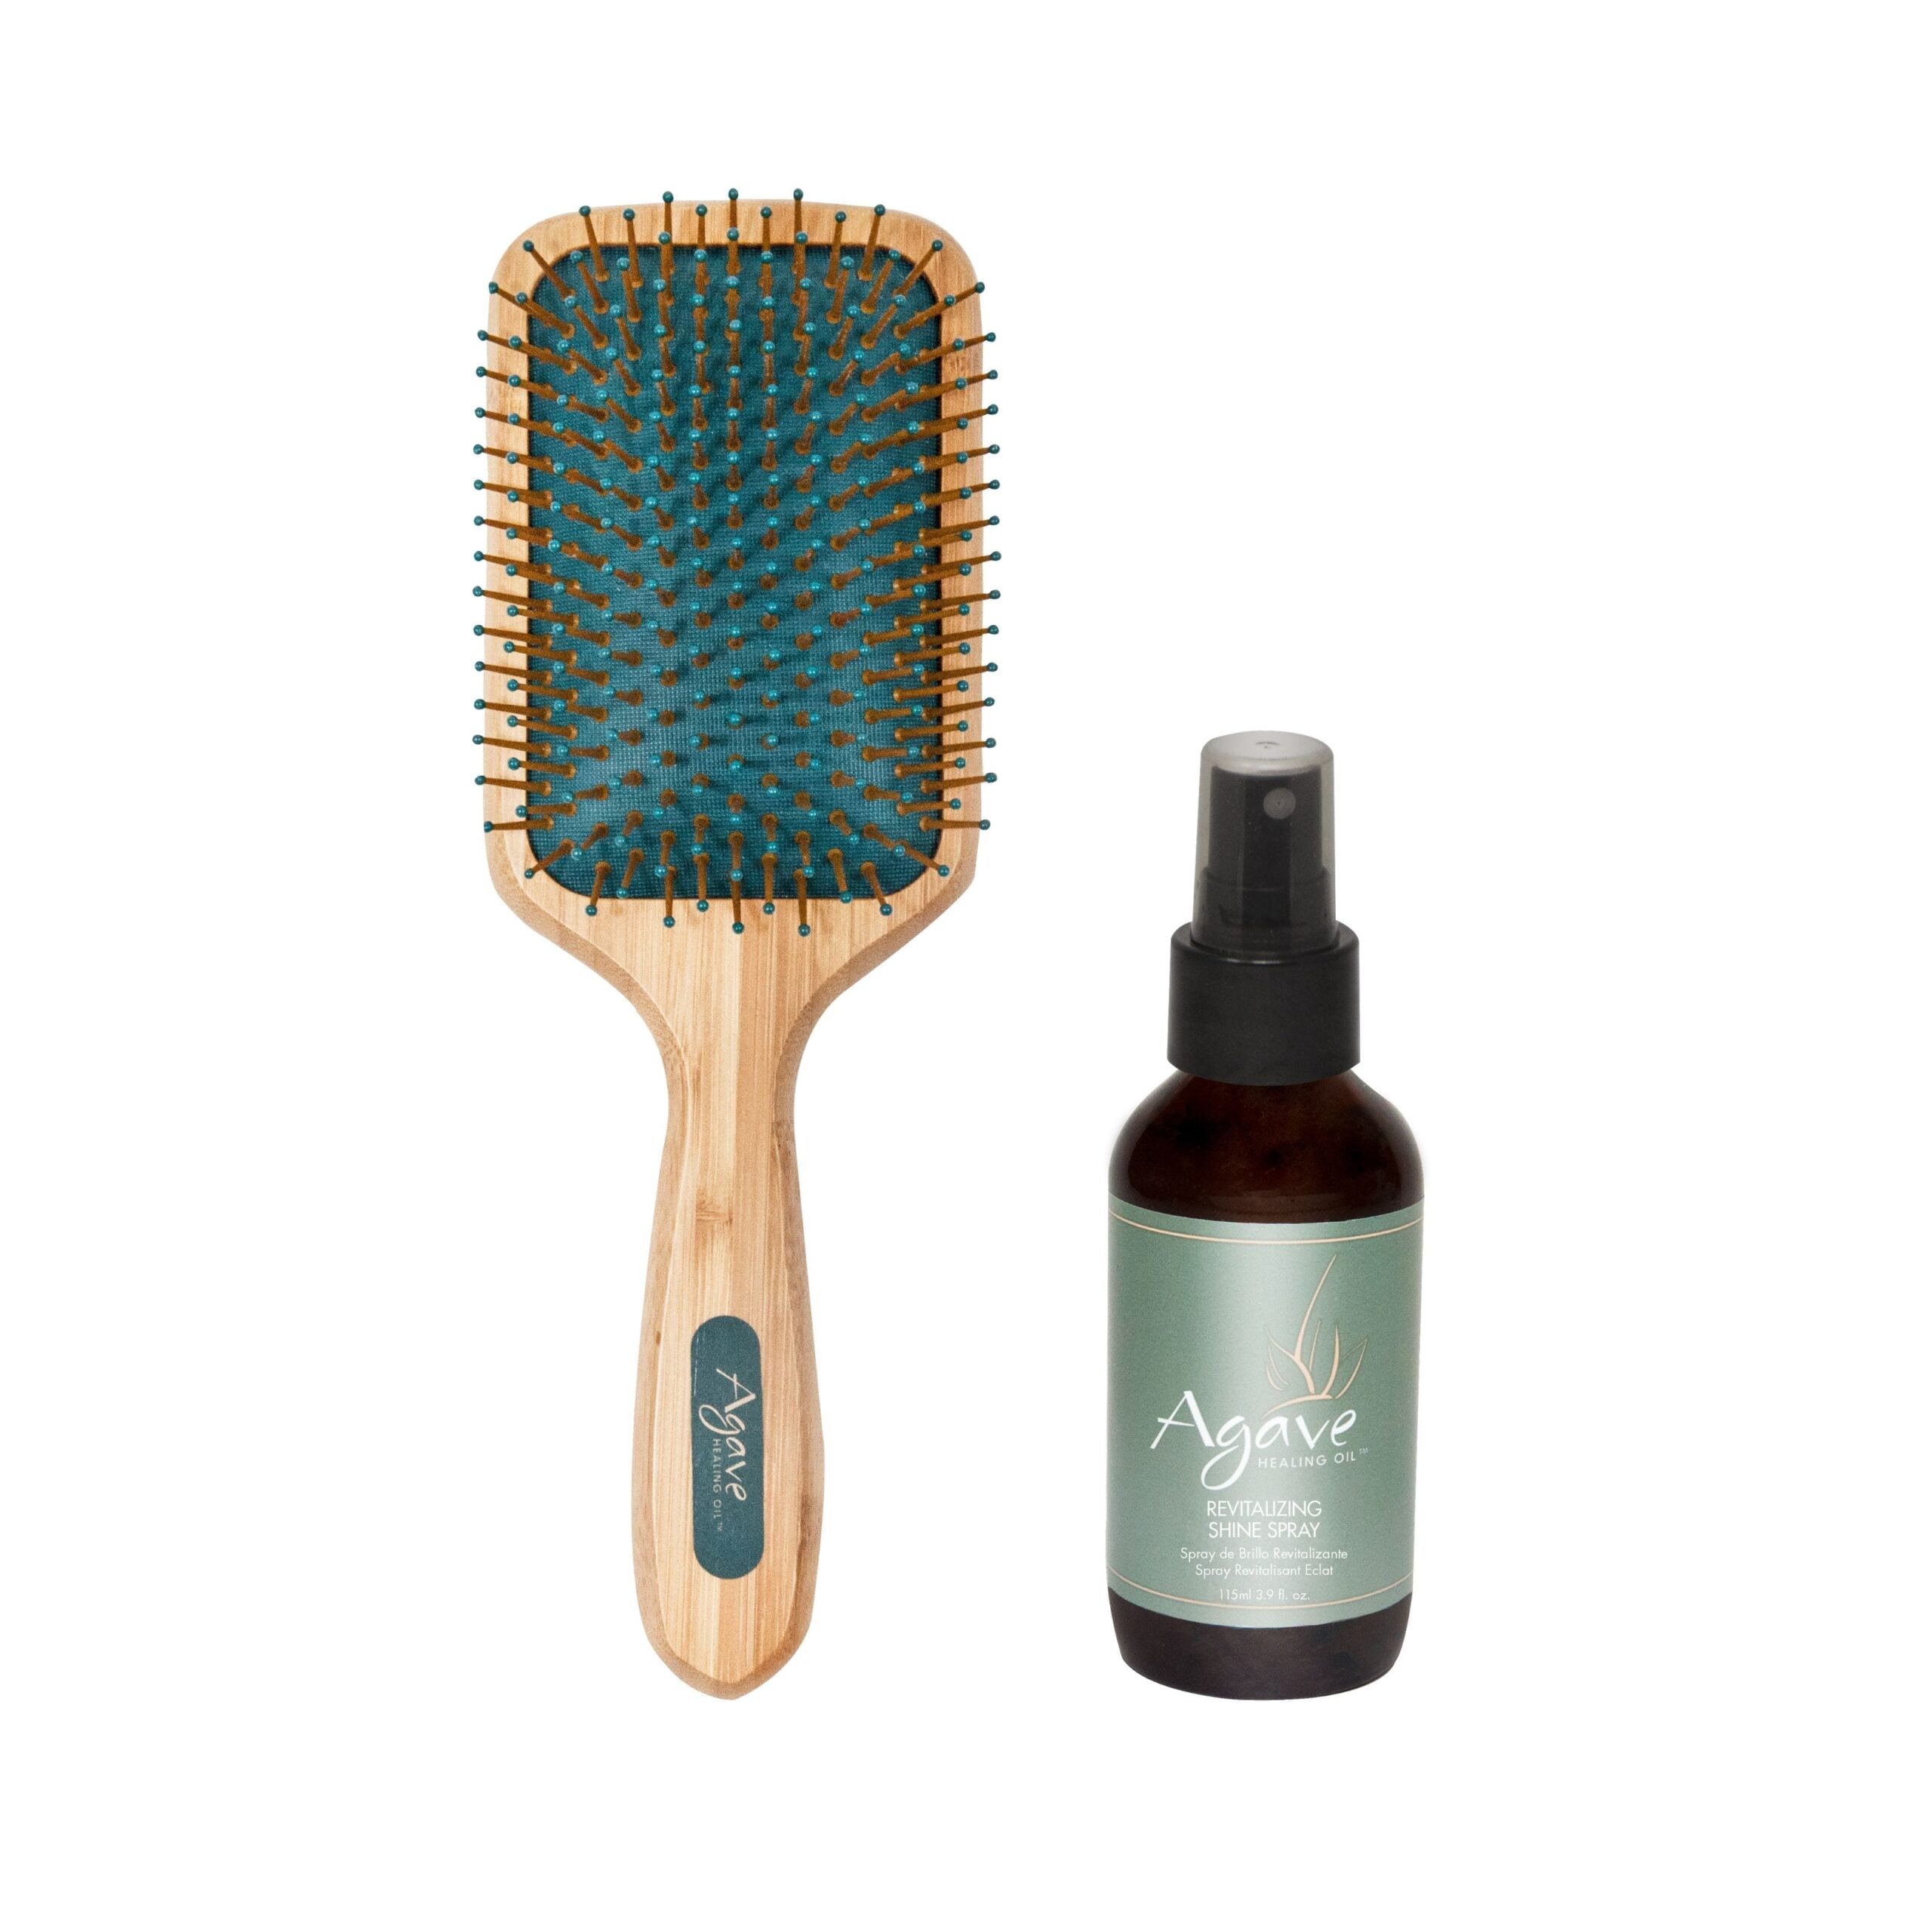 AGAVE BAMBOO PADDLE BRUSH AND HEALING OIL BUNDLE - Beauty Professional  Supplier